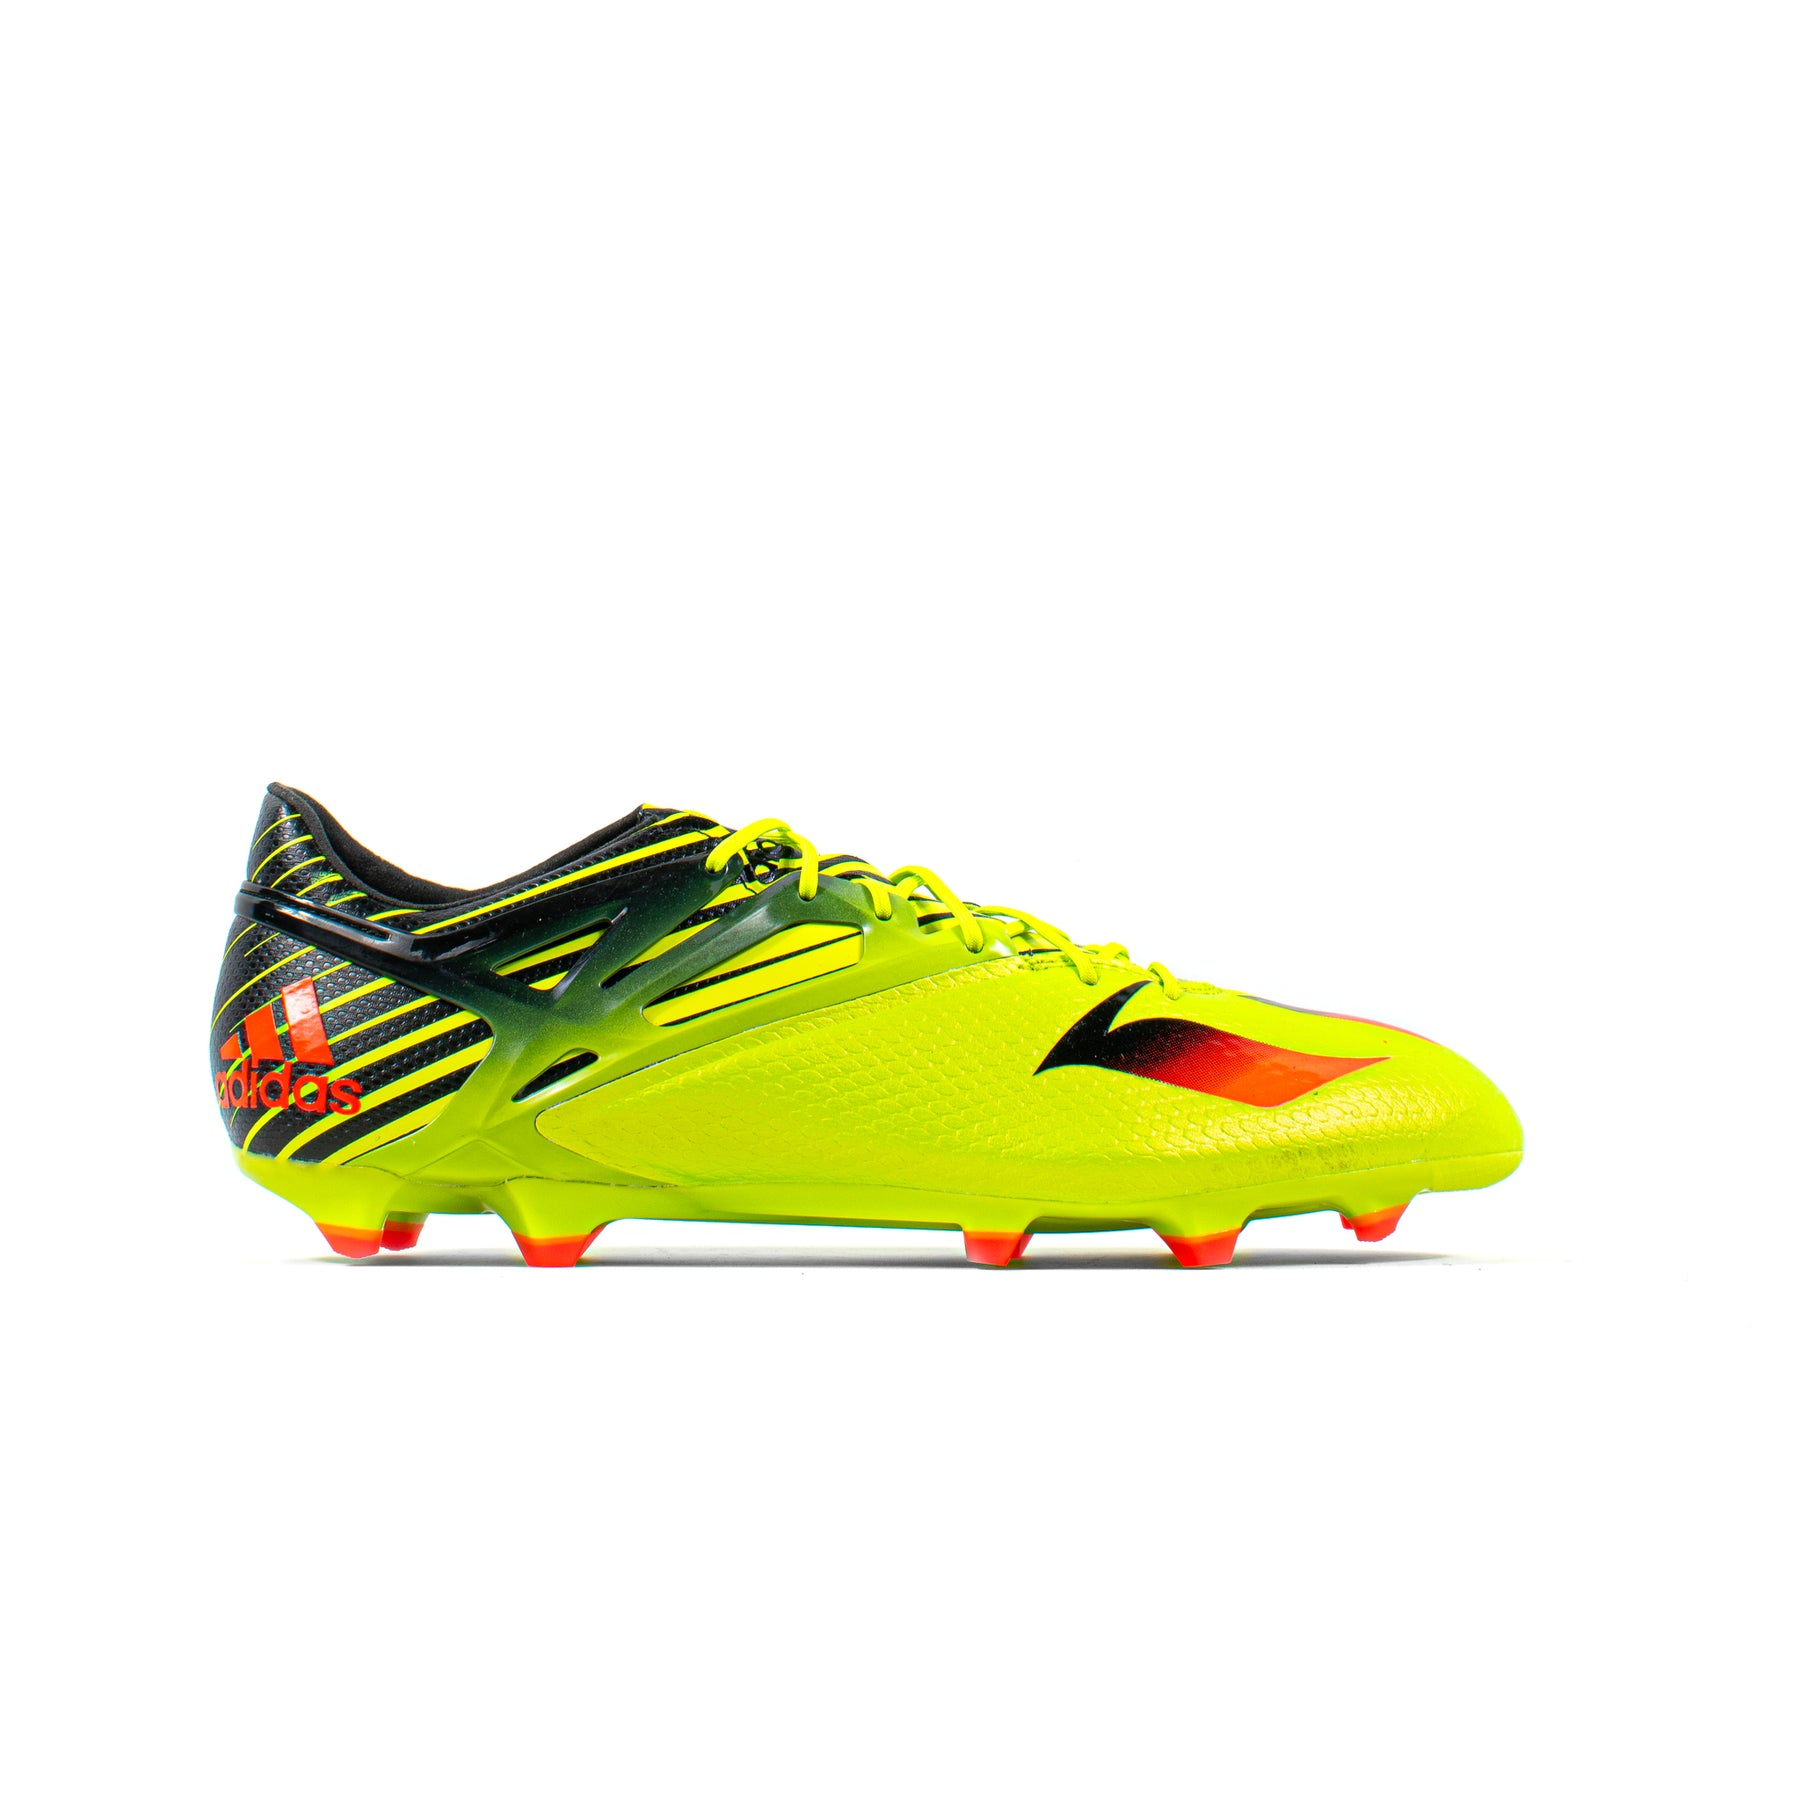 Adidas Messi 15.1 2015 Green Classic Soccer Cleats